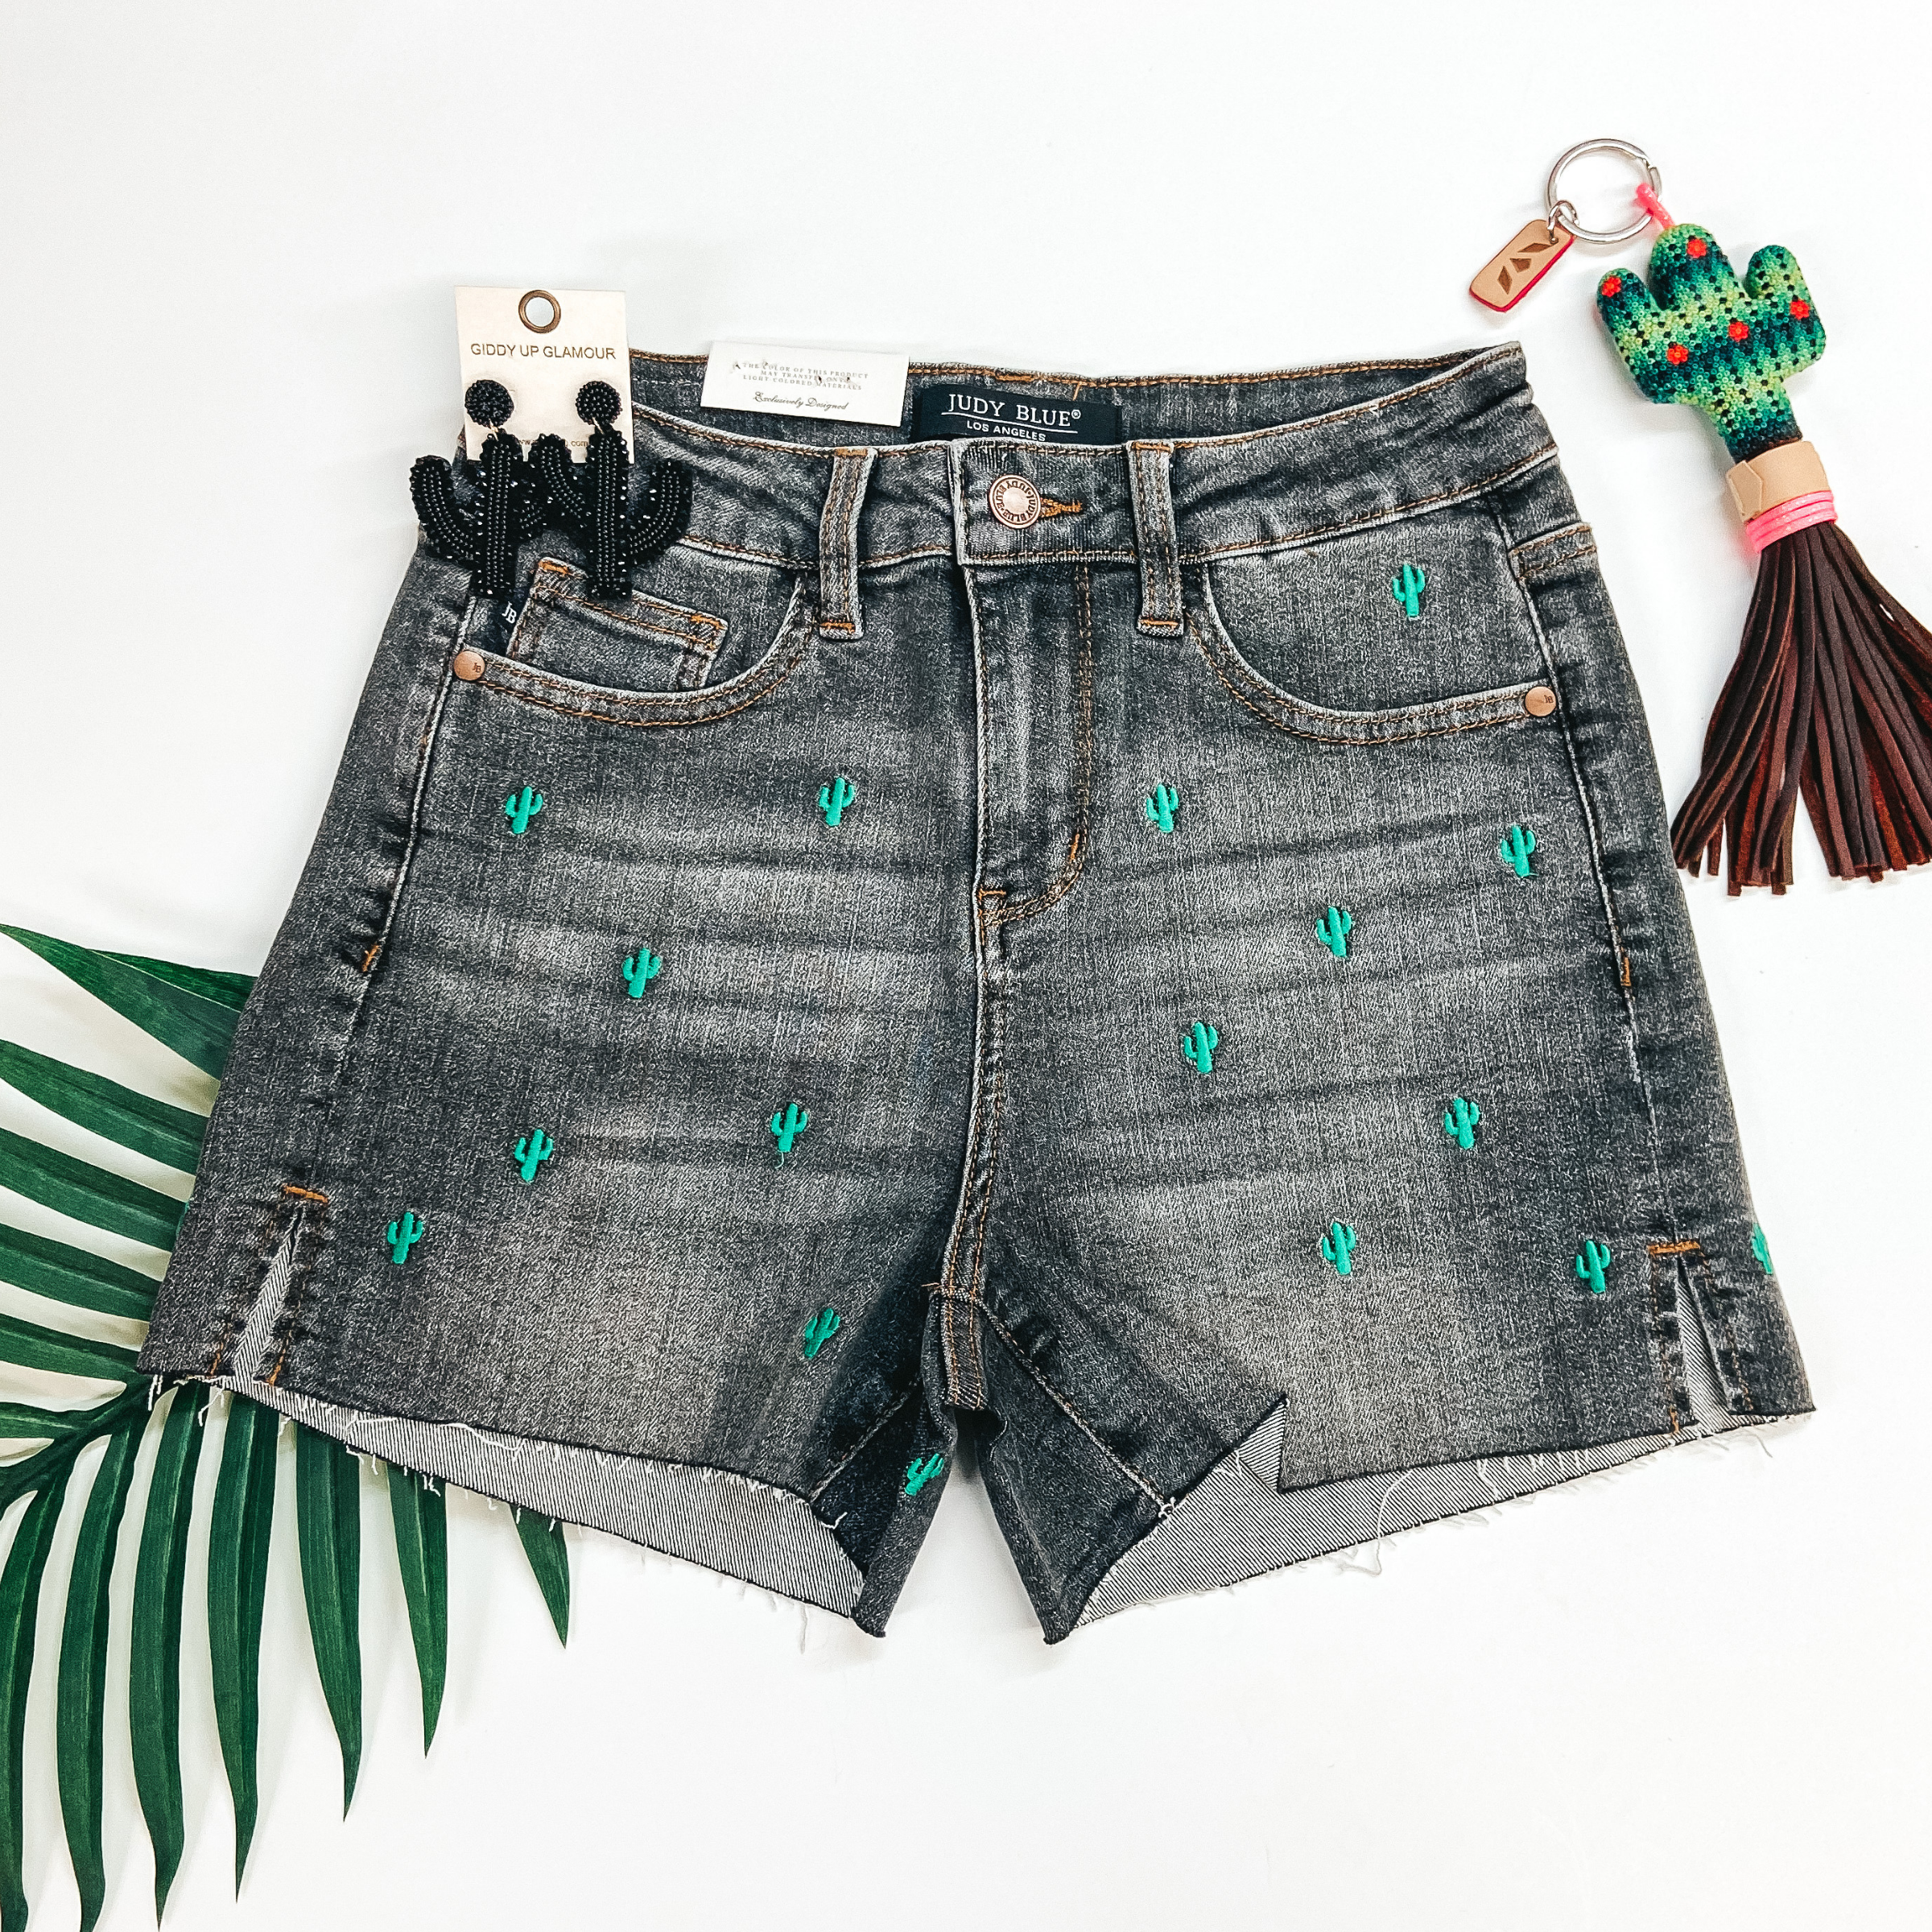 A pair of black washed shorts that are cut off. These shorts have tiny saguaro cacti embroidered all over. Shorts are pictured on a white background with cactus earrings, a cactus keychain, and a palm leaf.